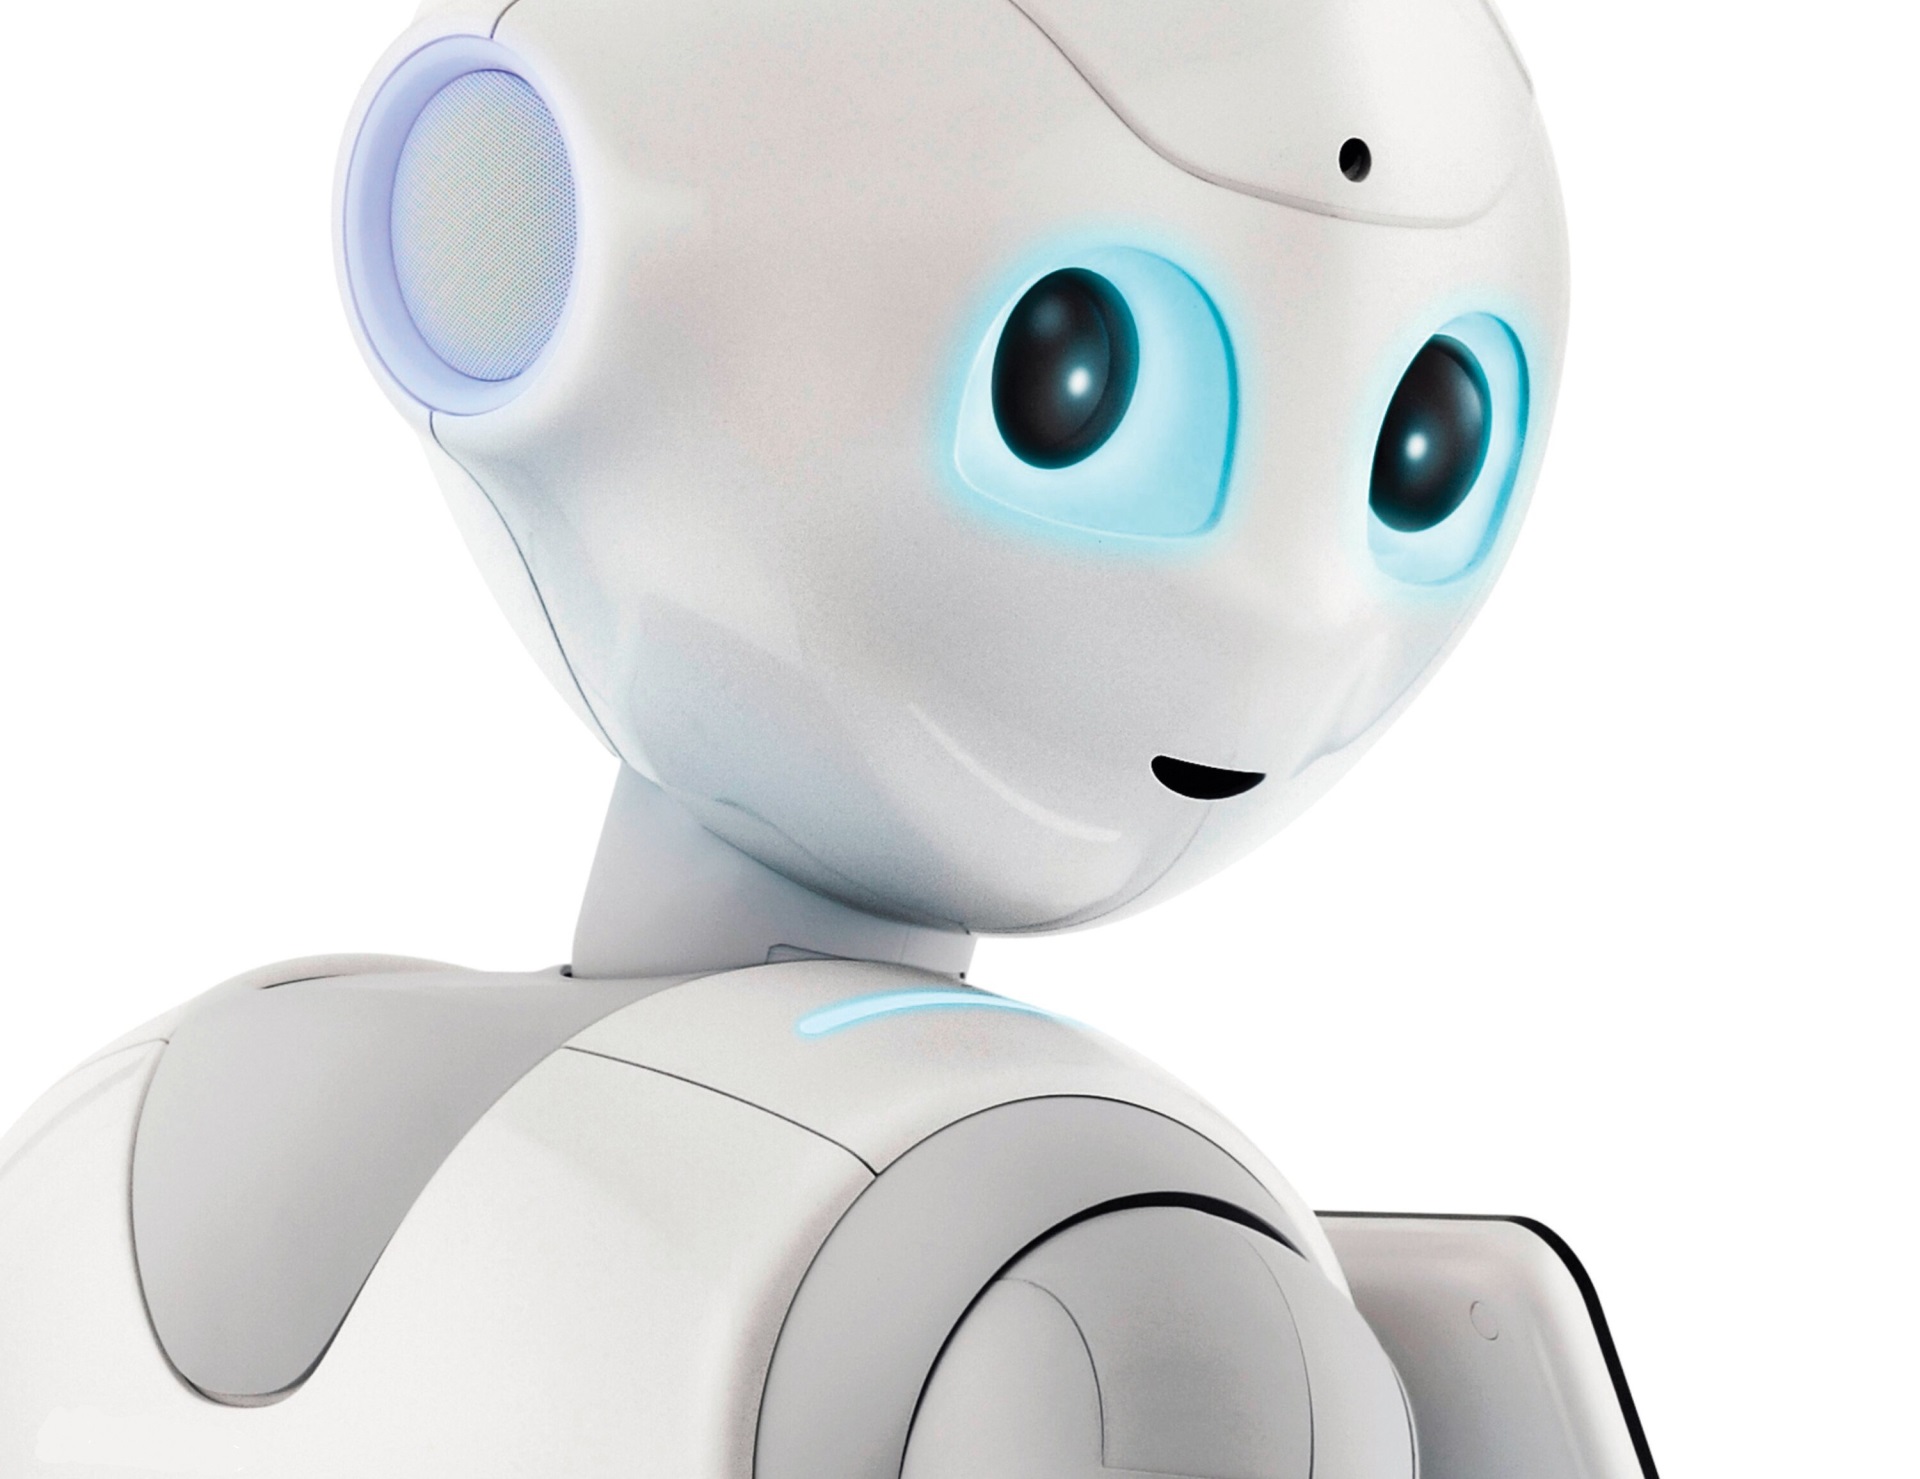 Social Robots Market Research Report 2022 | Trends, Growth, Size, Share and Forecast 2027